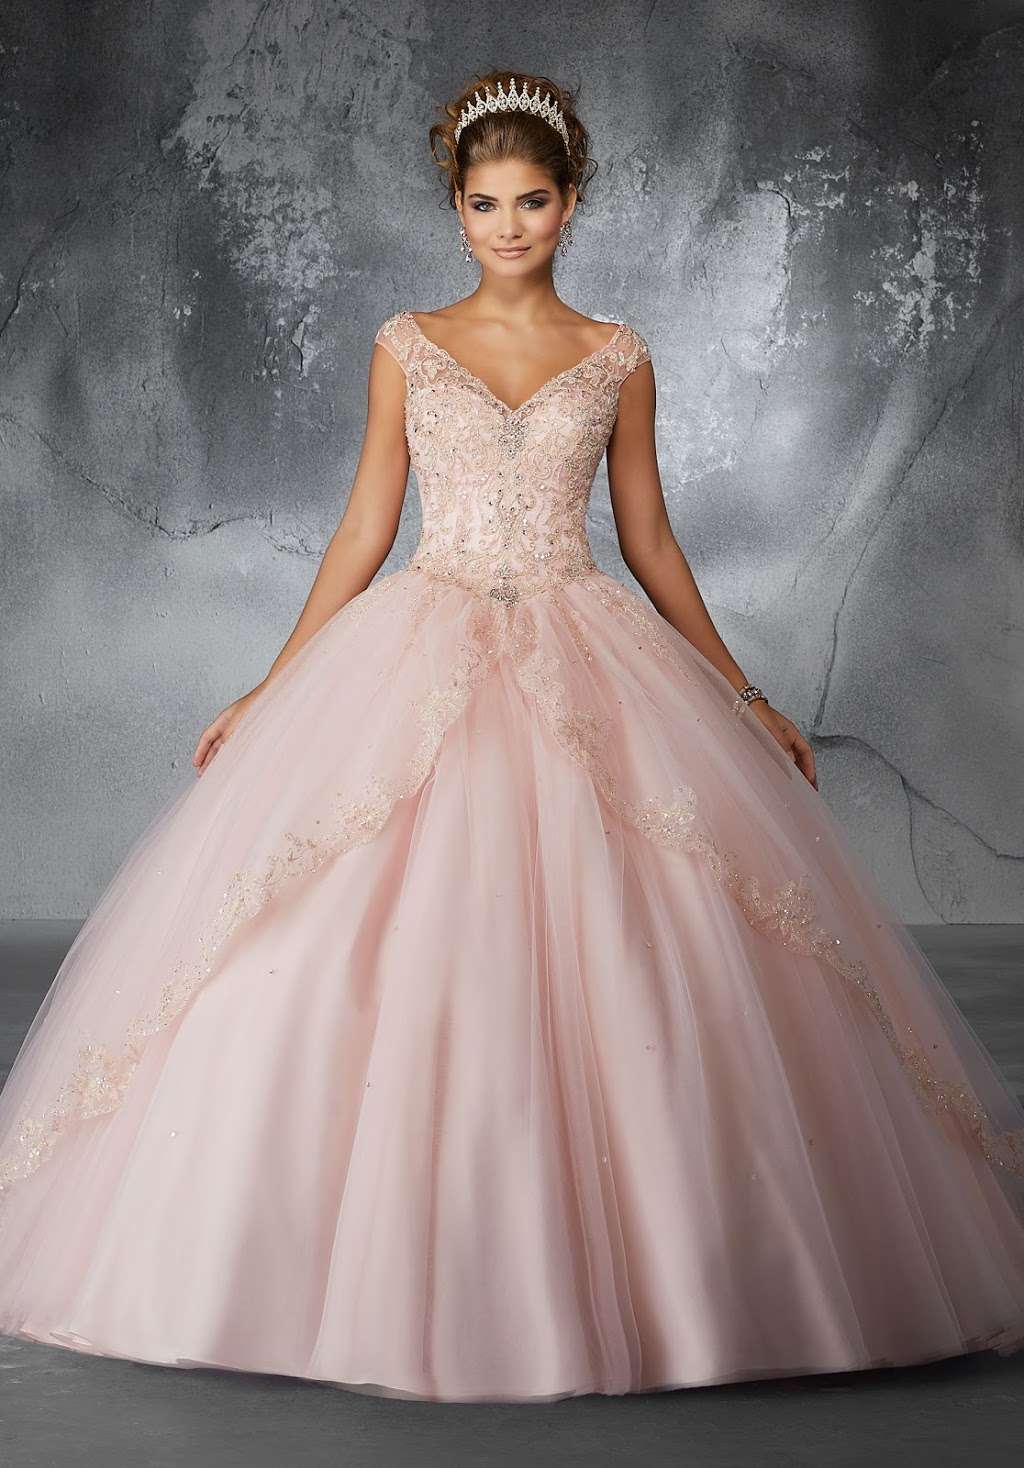 QUINCE GALLERY - A formal wear store for Quinceañera, Sweet 16 a | 3086 Jog Rd, Greenacres, FL 33467 | Phone: (561) 432-0082